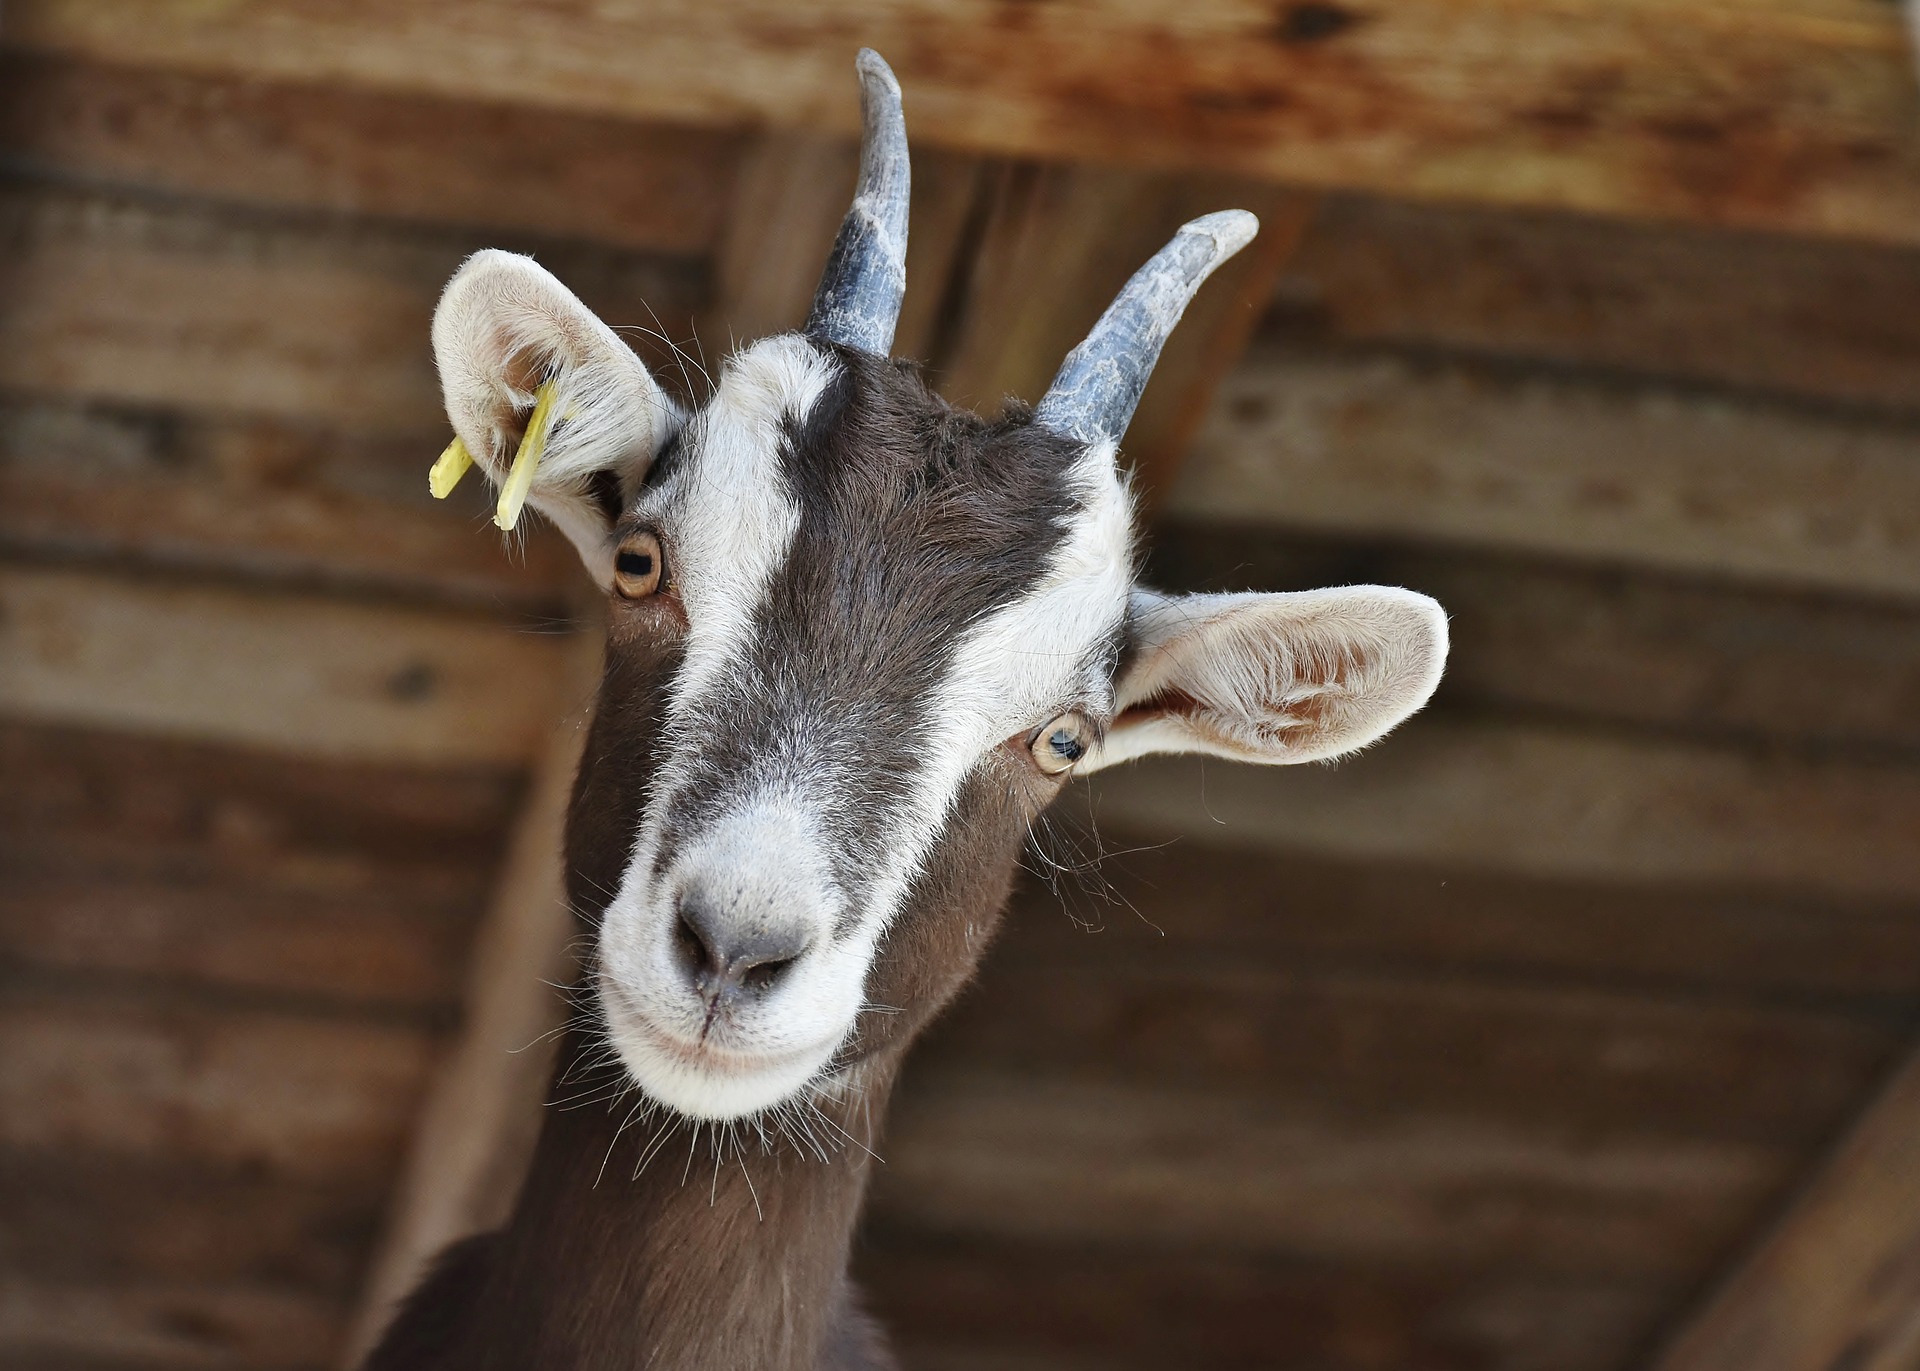 close up of a brown and white goat in a barn